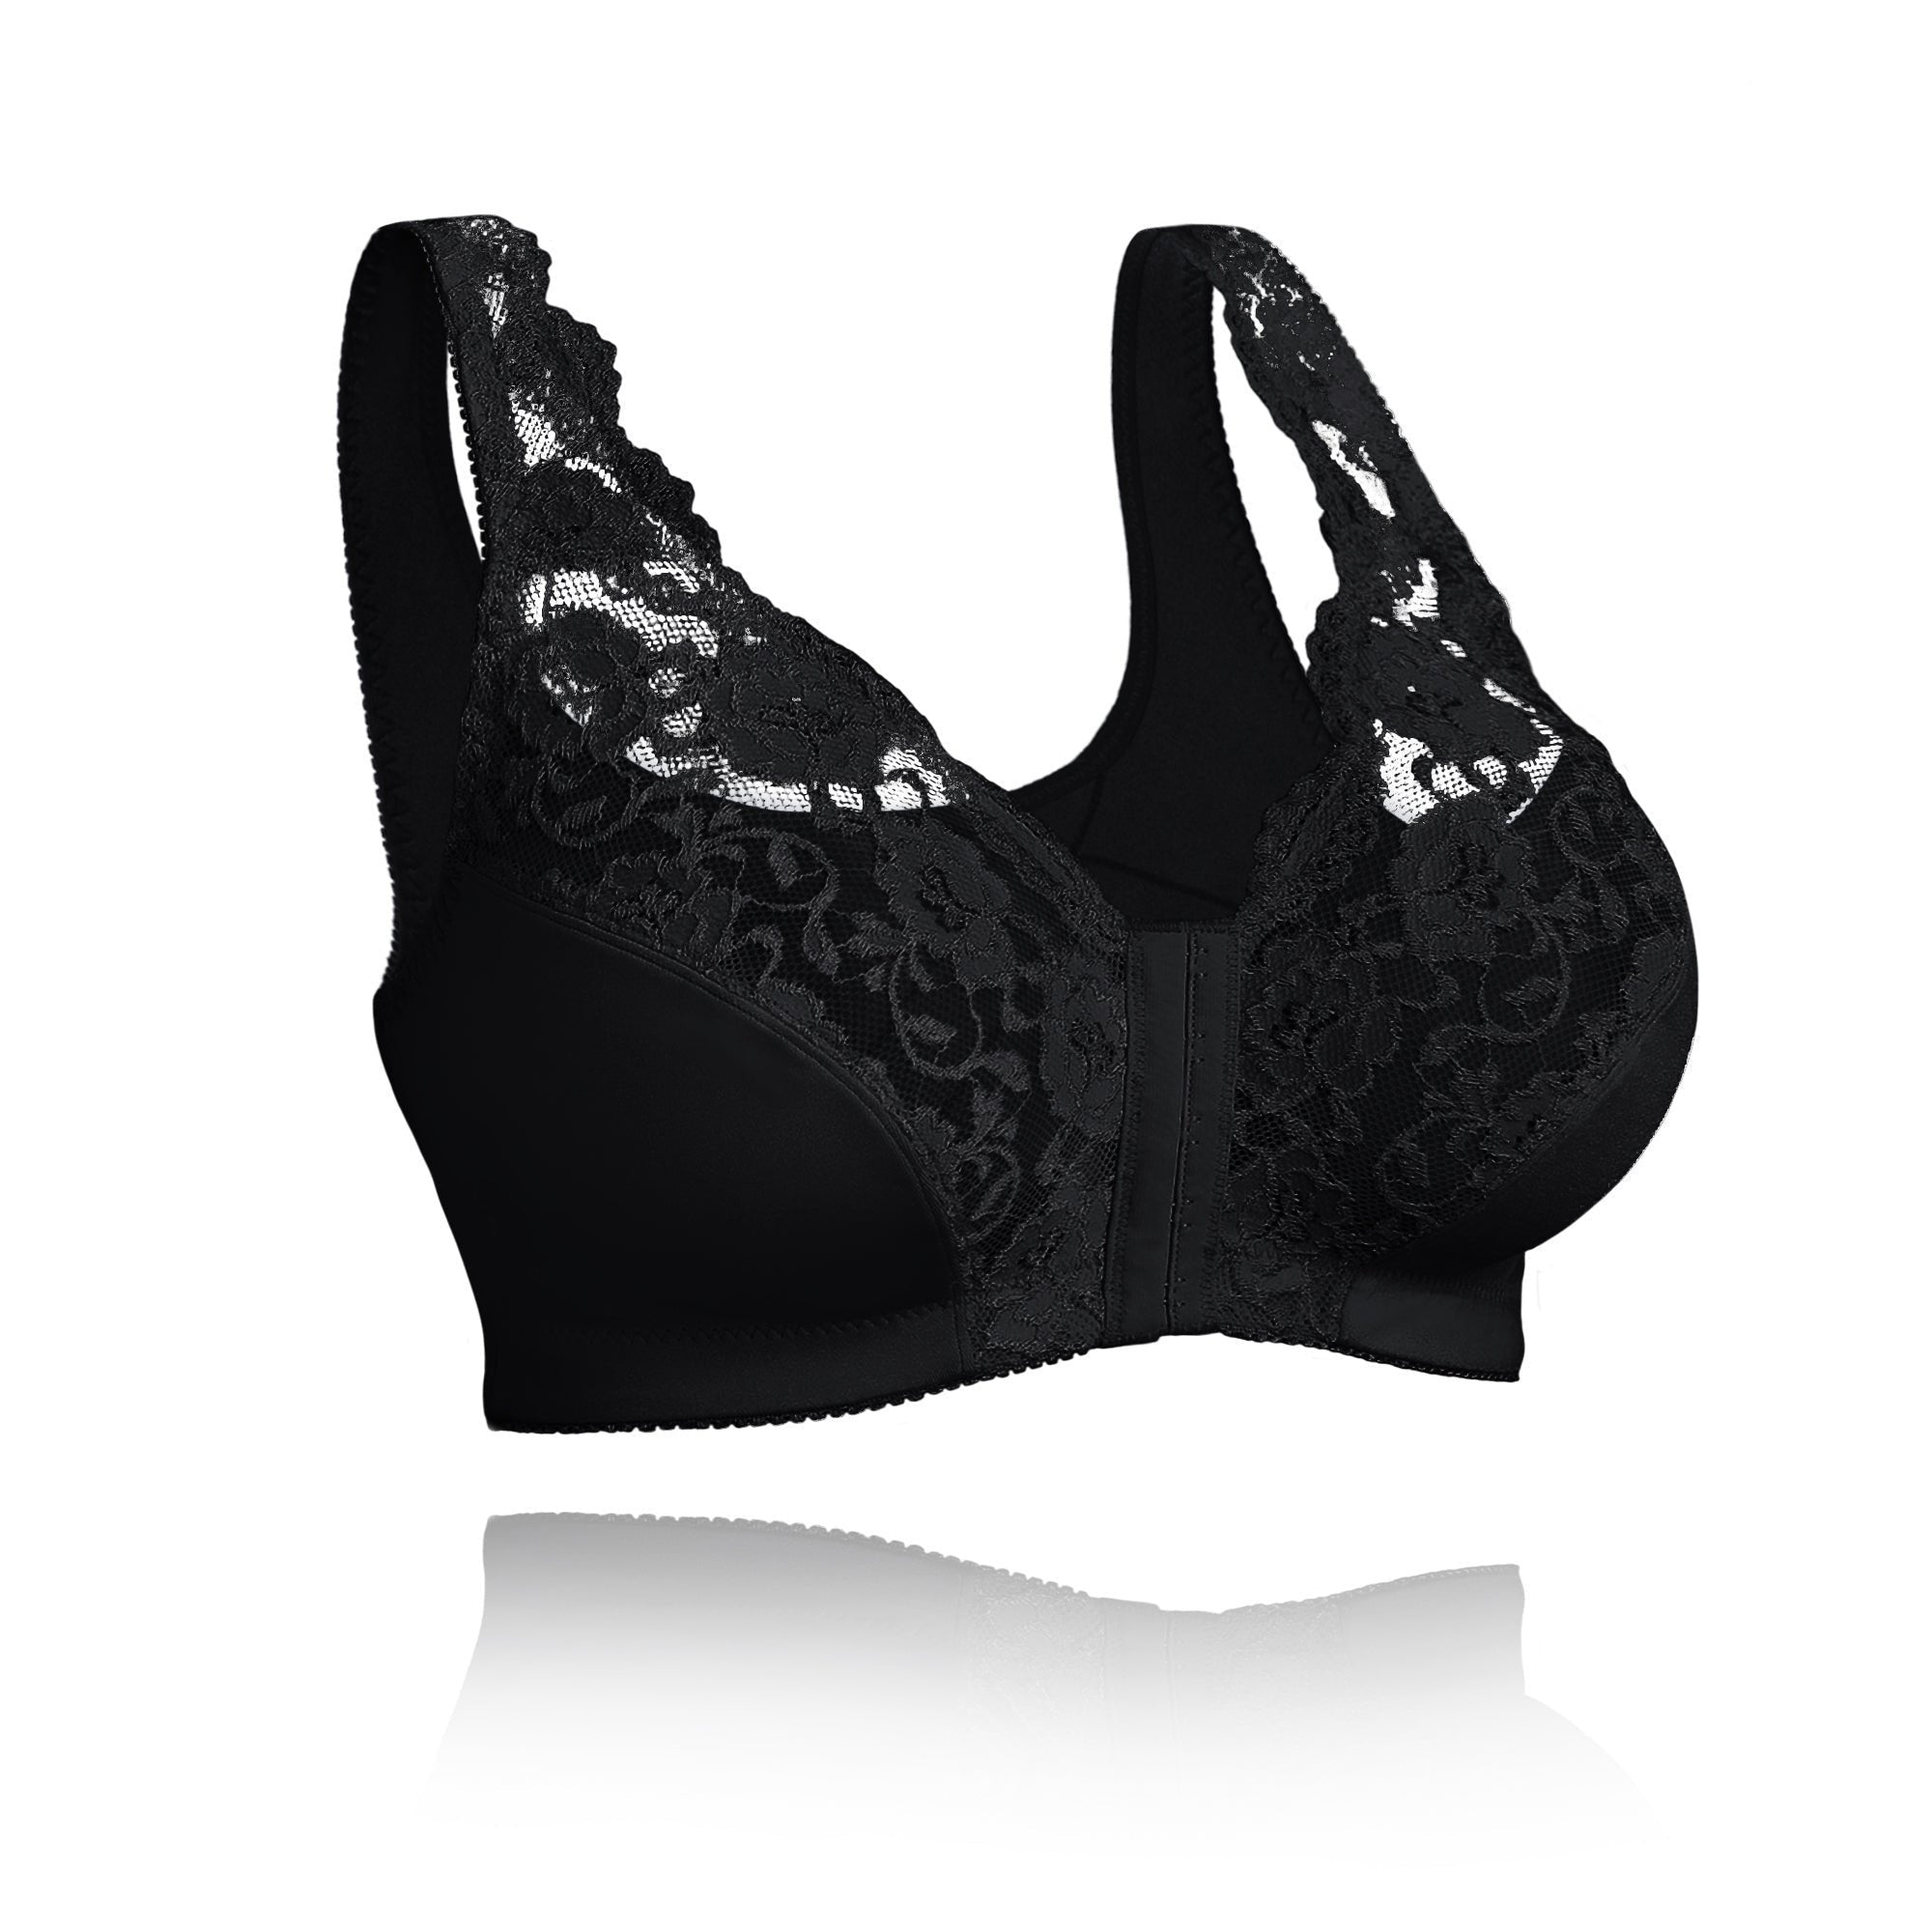 SENIORSBRA®WOMEN'S 18-HOUR Front Hooks, Stretch-Lace, Super-Lift And Posture Correction-ALL IN ONE BRA(BUY 1 GET 1 FREE) -Black